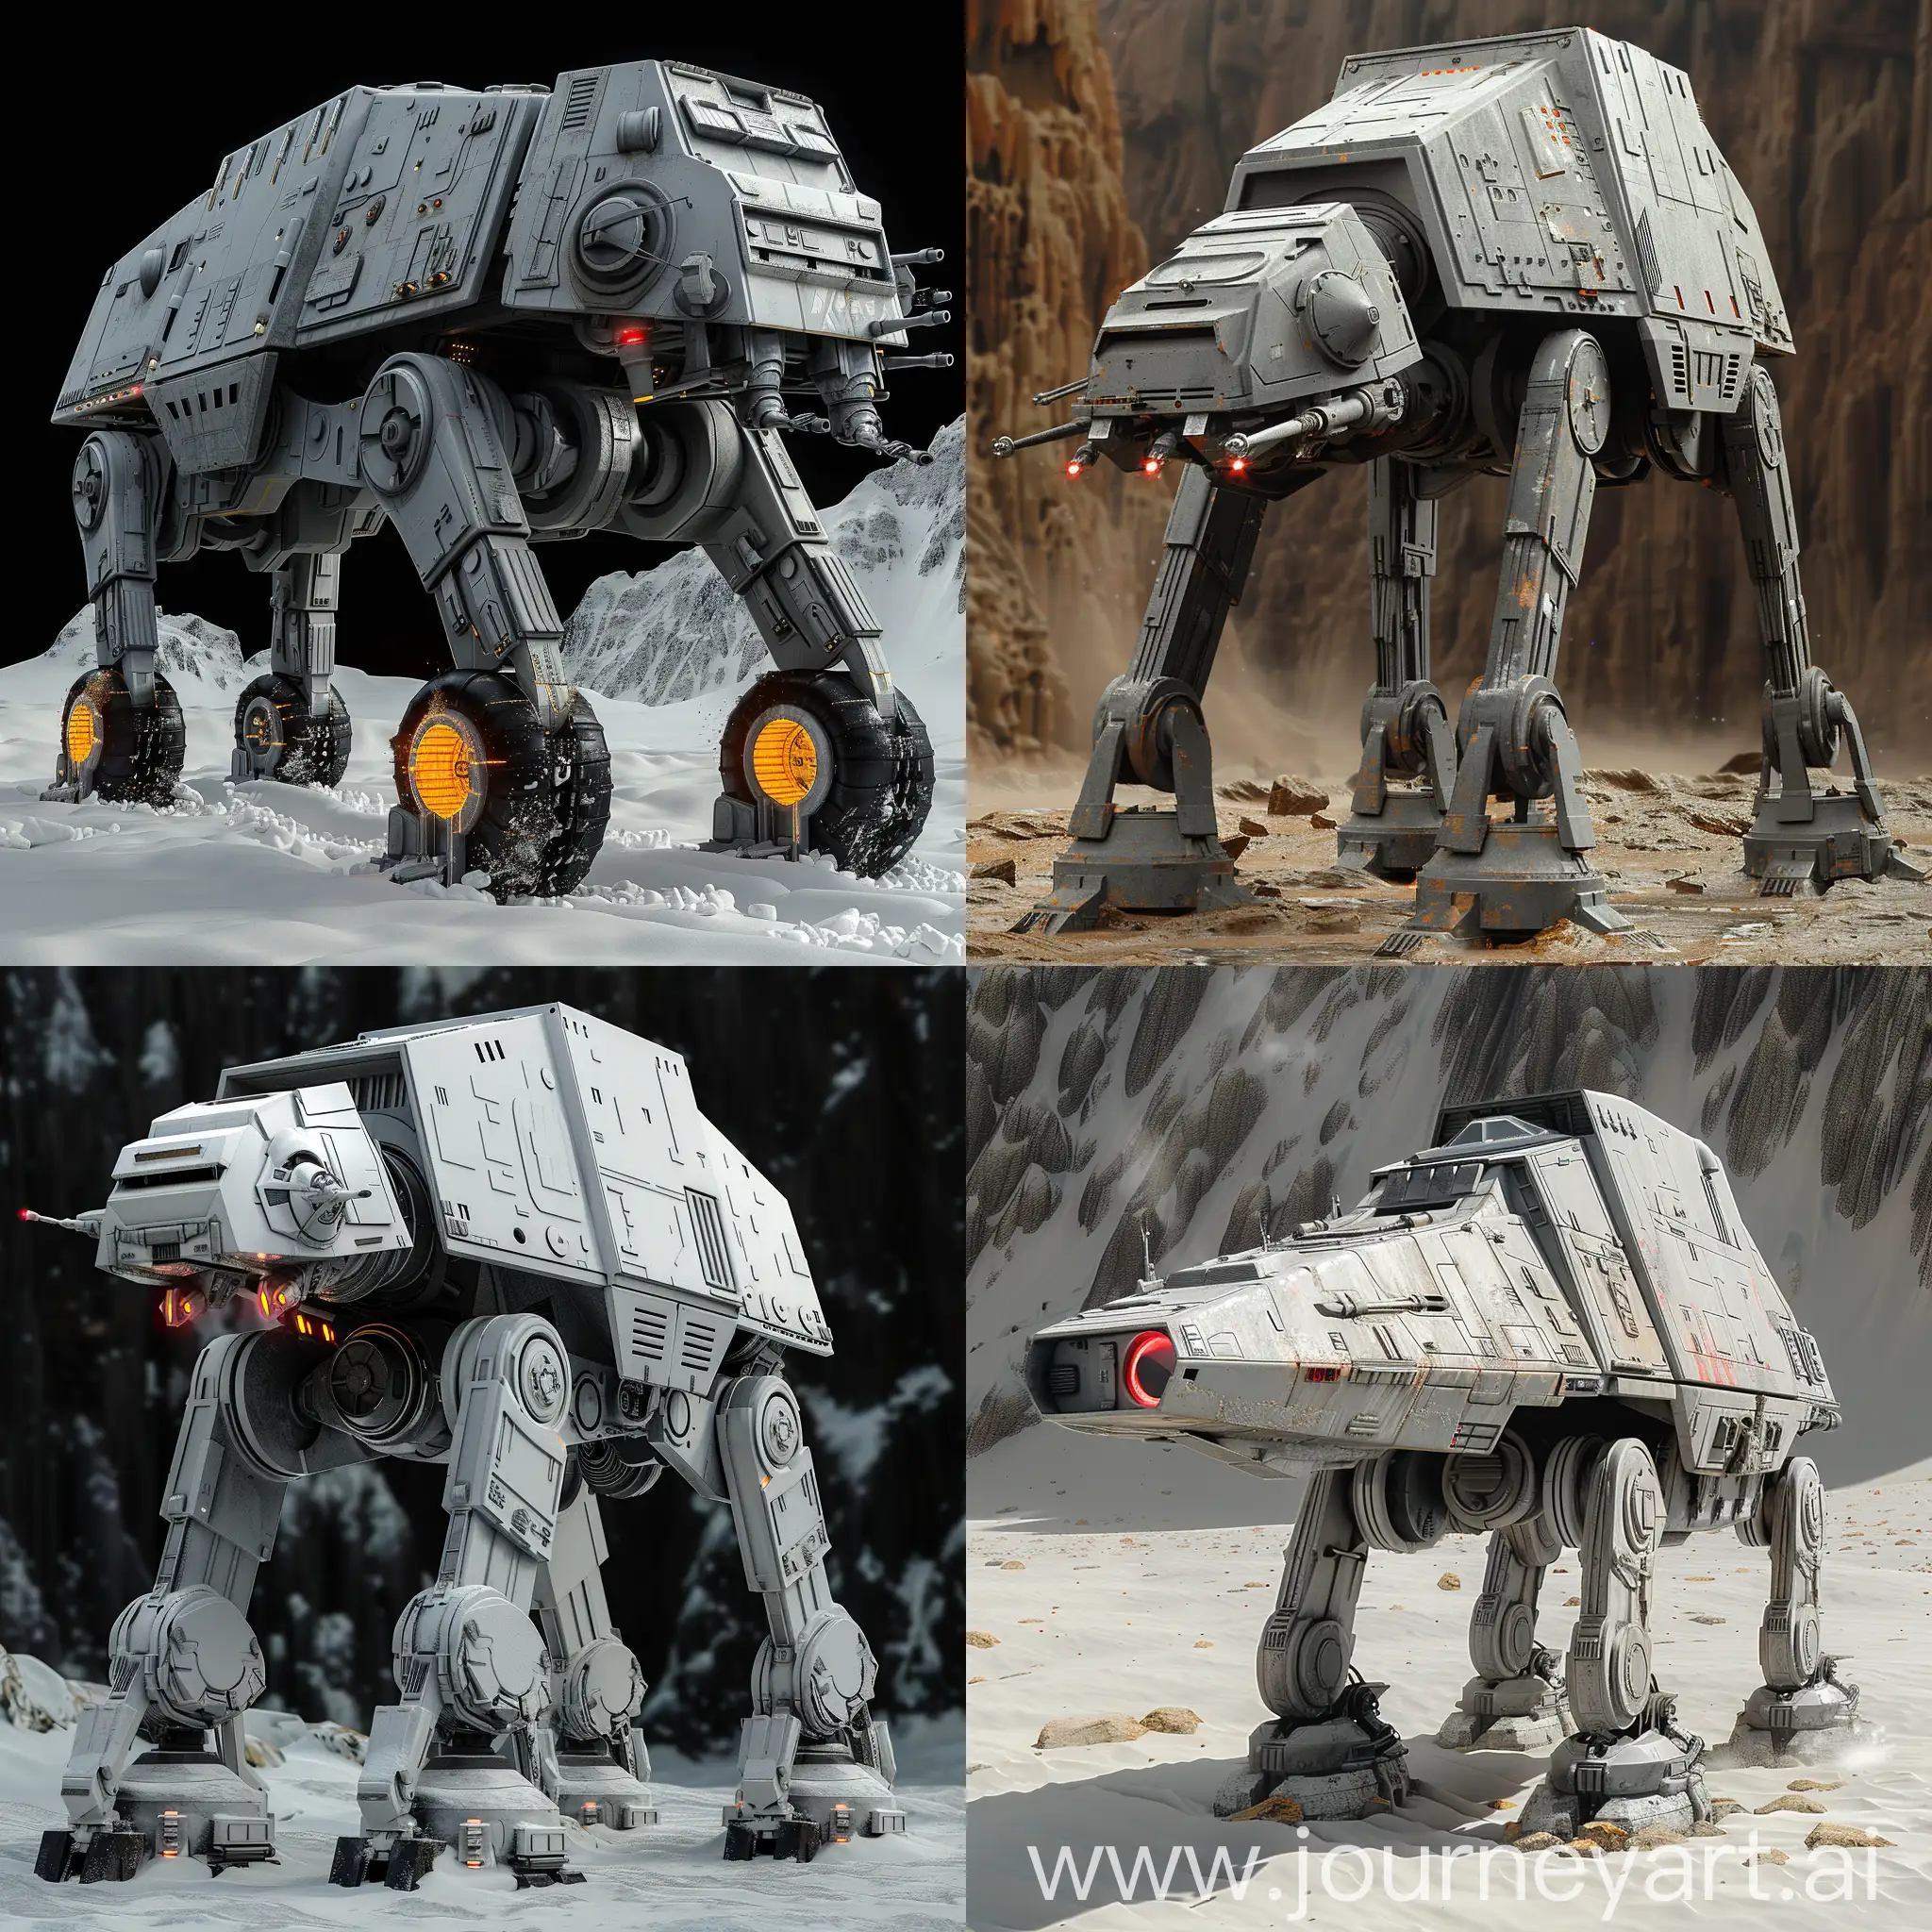 Futuristic-Star-Wars-All-Terrain-Armored-Transportation-with-Advanced-AI-Integration-and-Energy-Shielding